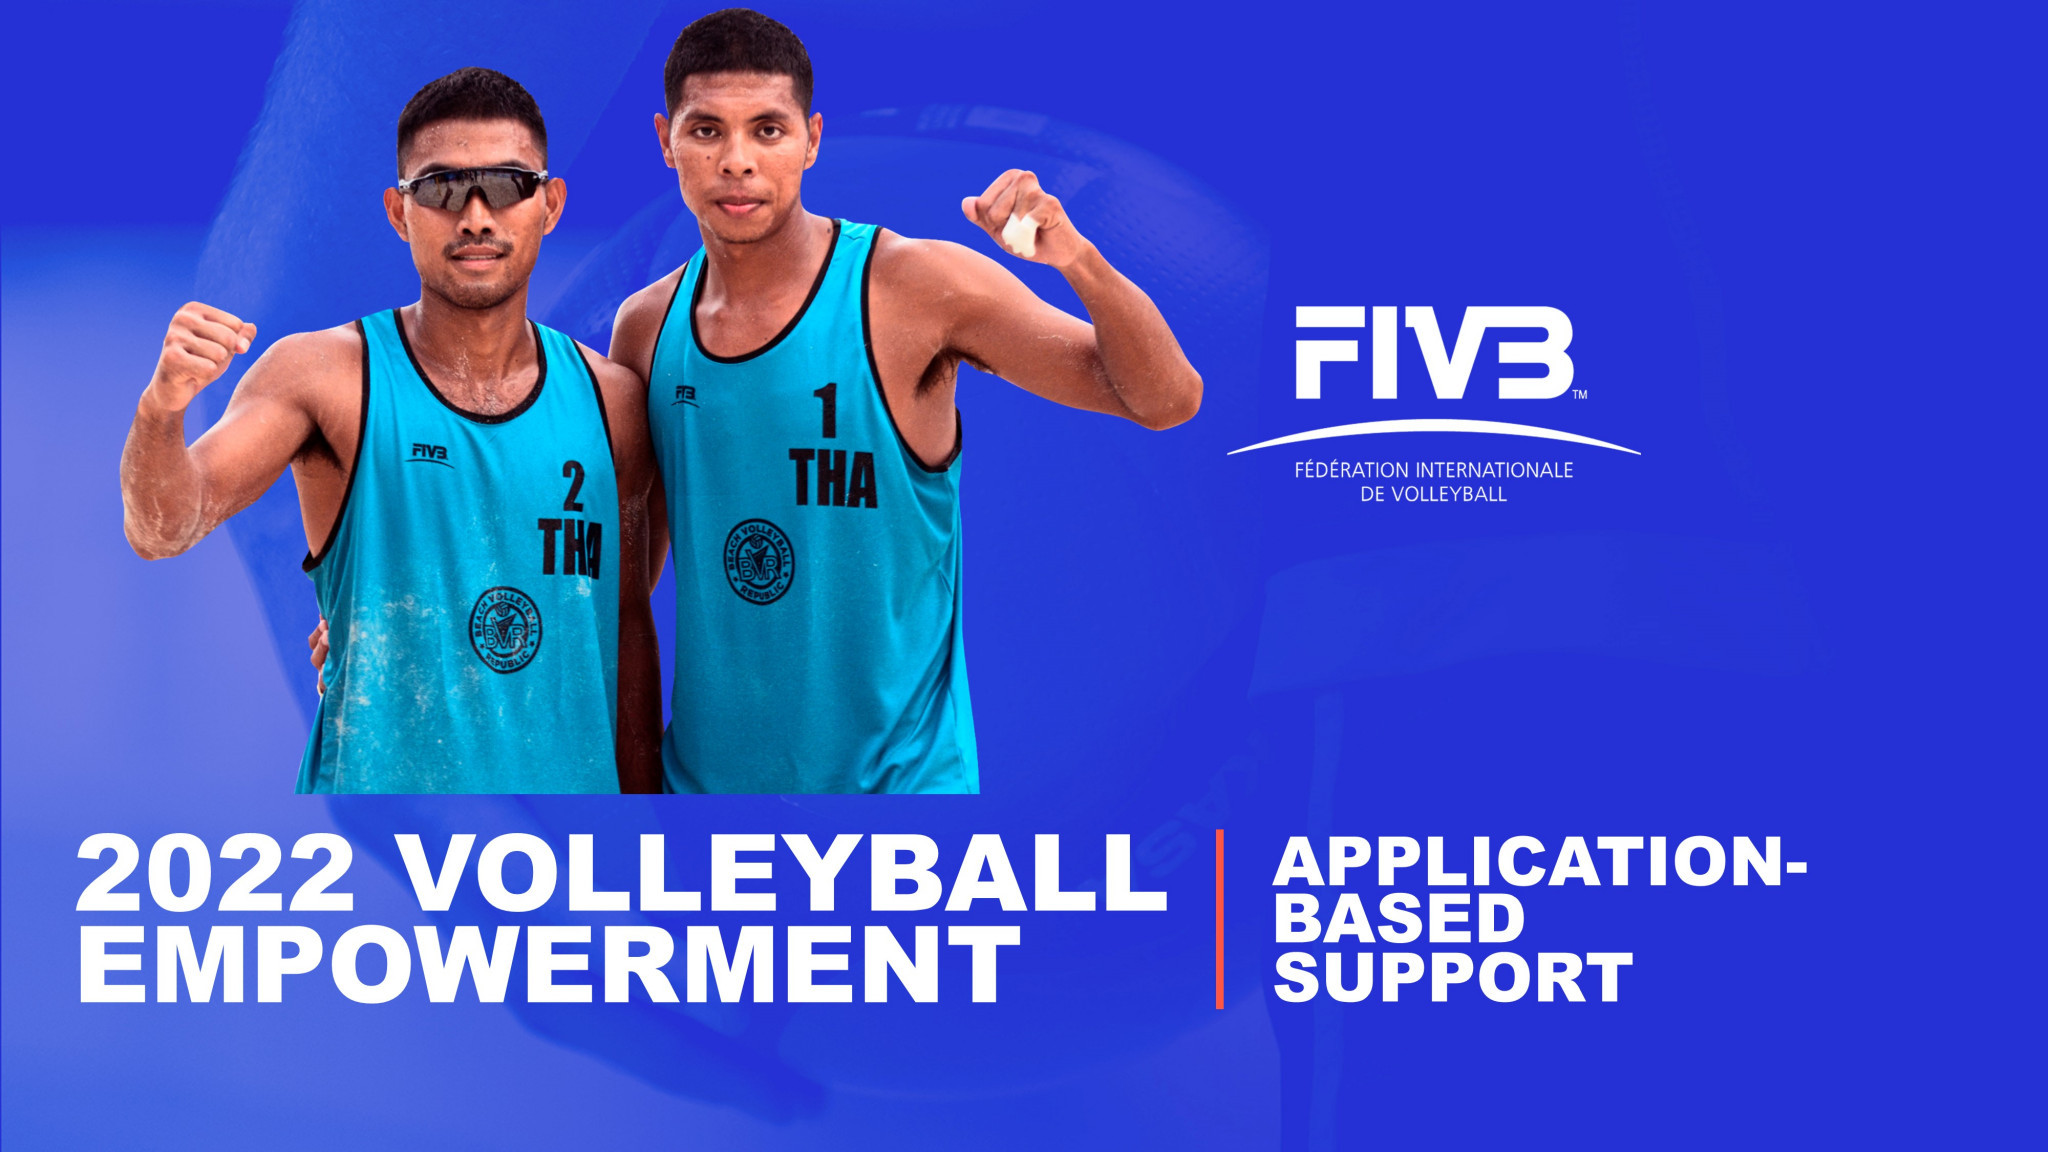 A record record number of projects approved for the 2022-2023 period by Volleyball Empowerment ©FIVB